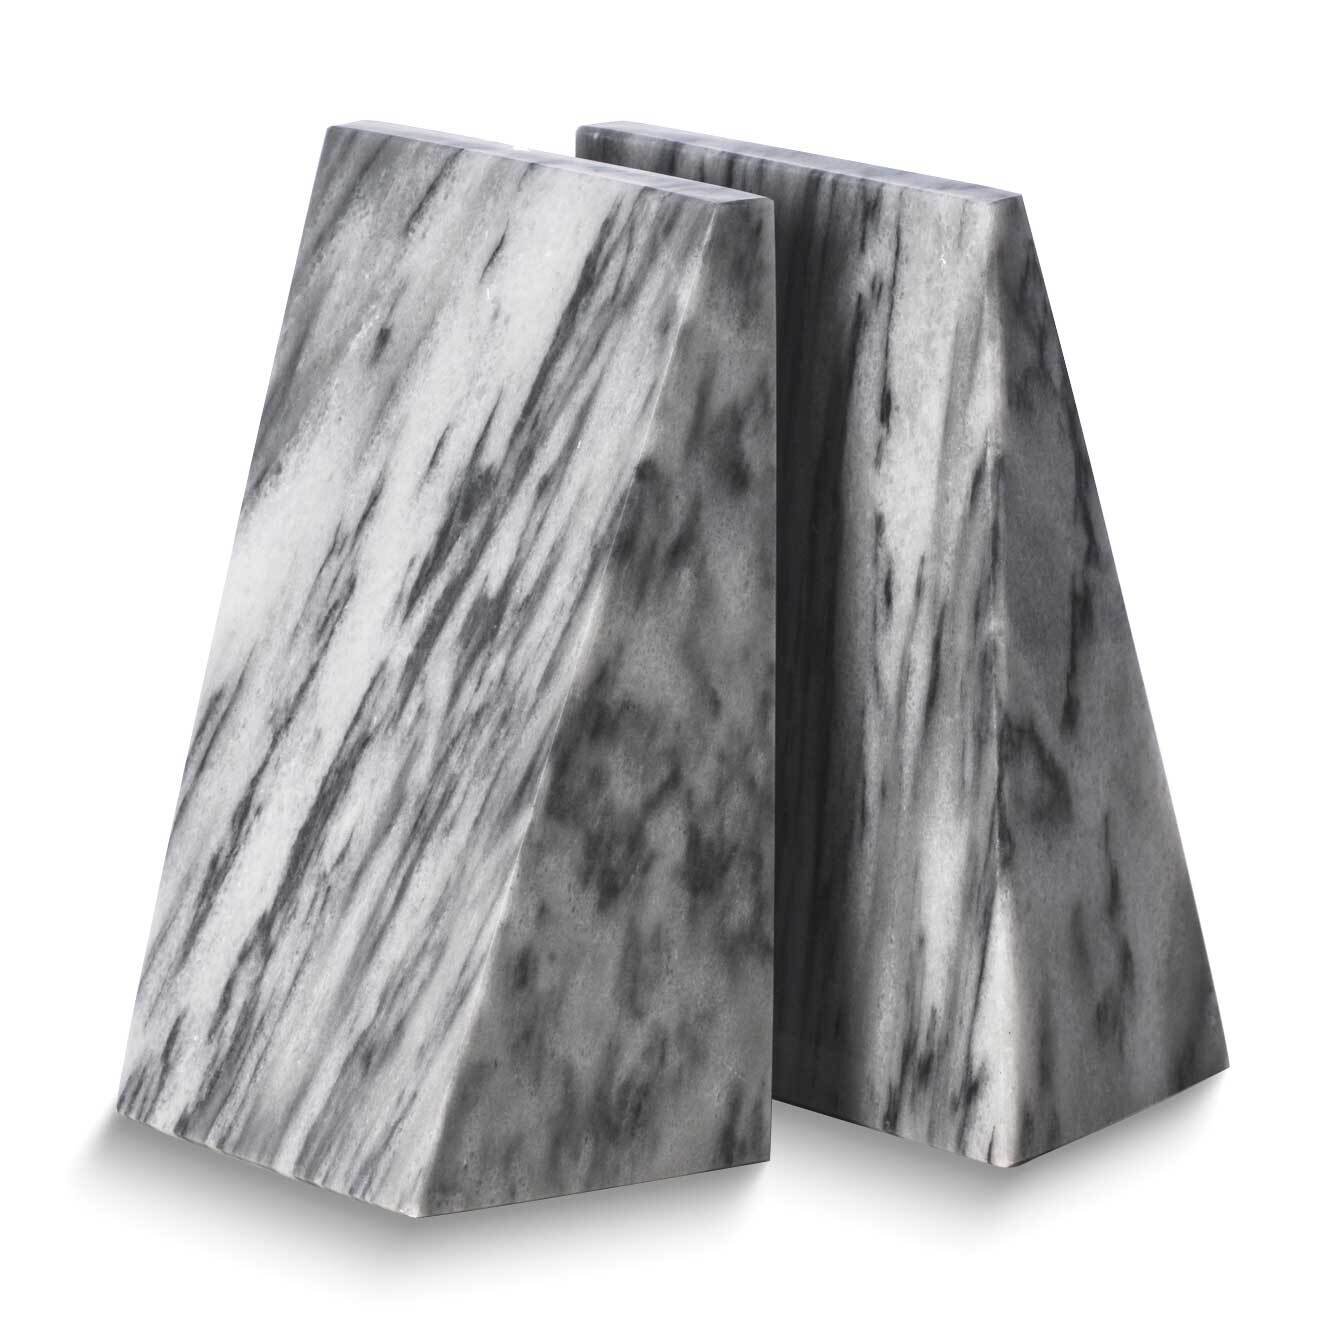 Carrera Grey Marble Wedge Bookend Set GM24179GR